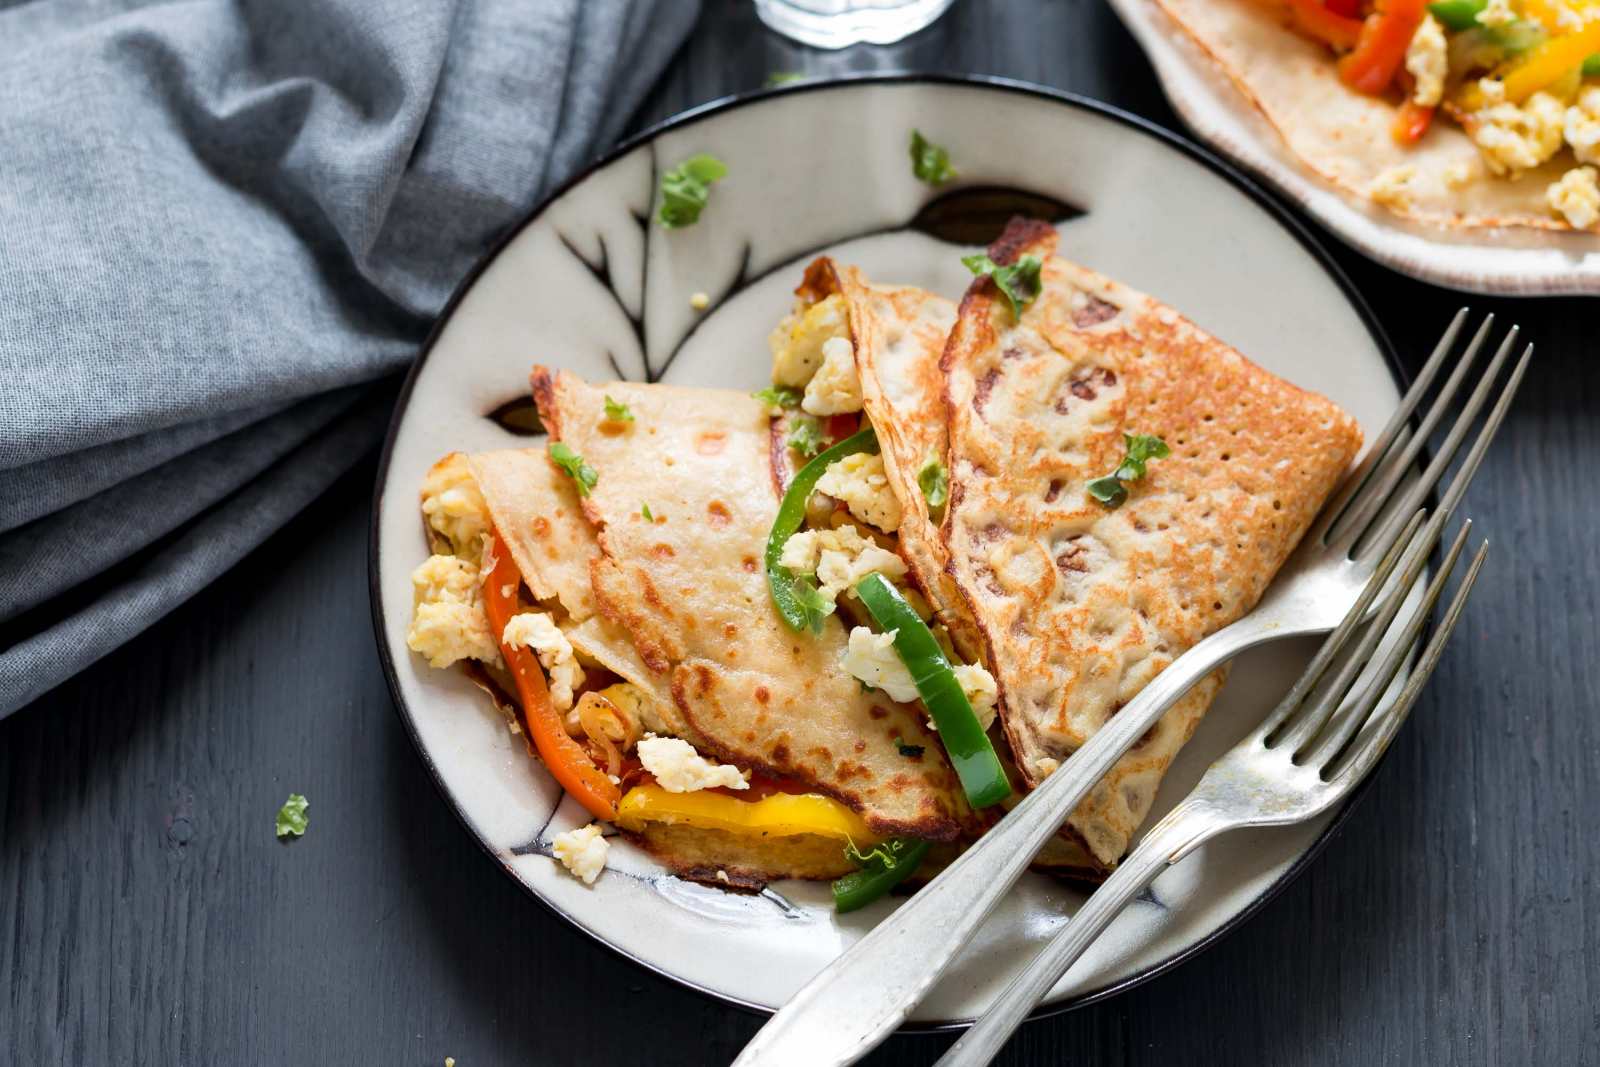 Whole Wheat Crepe With Eggs And Roasted Peppers Recipe